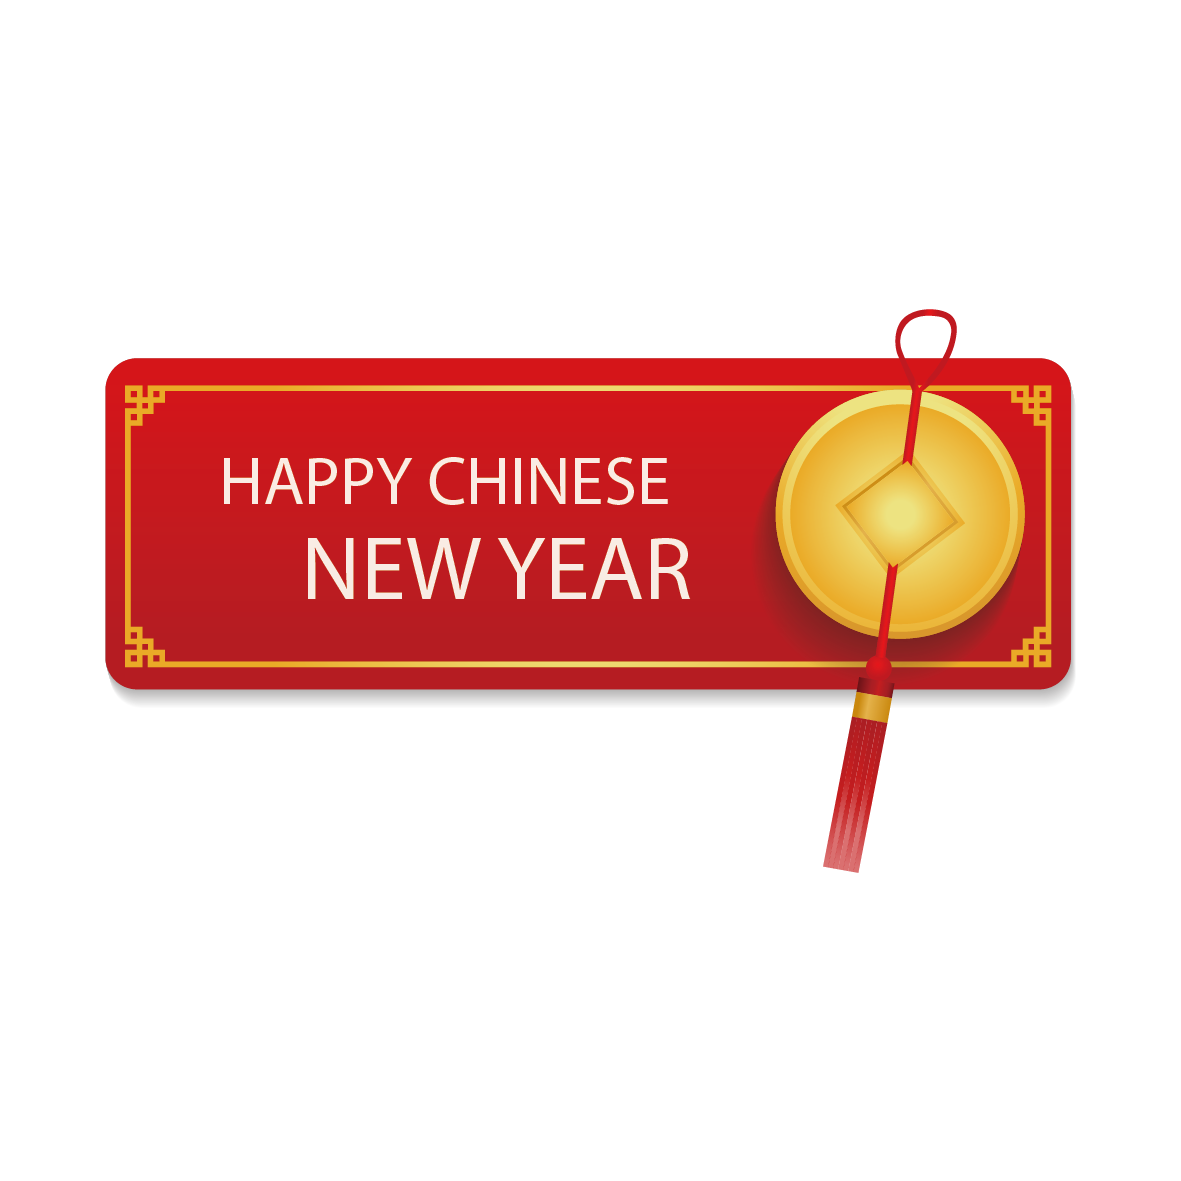 https://pngimg.com/d/chinese_new_year_PNG100.png